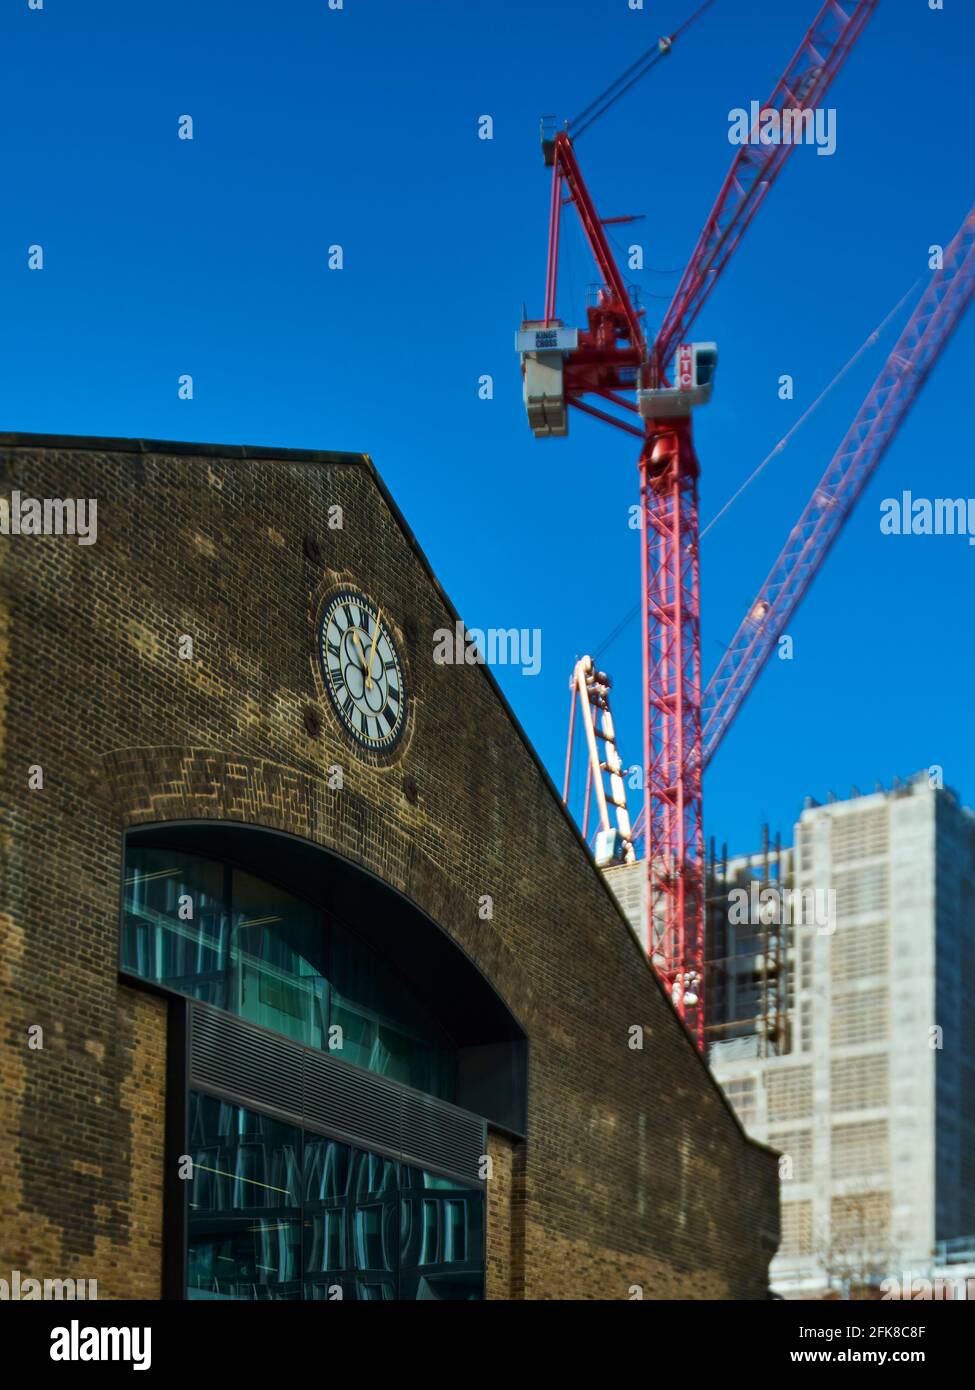 A tower crane helps to assemble the central core of a new building behind the facade of an old warehouse, repurposed during an urban renewal project. Stock Photo